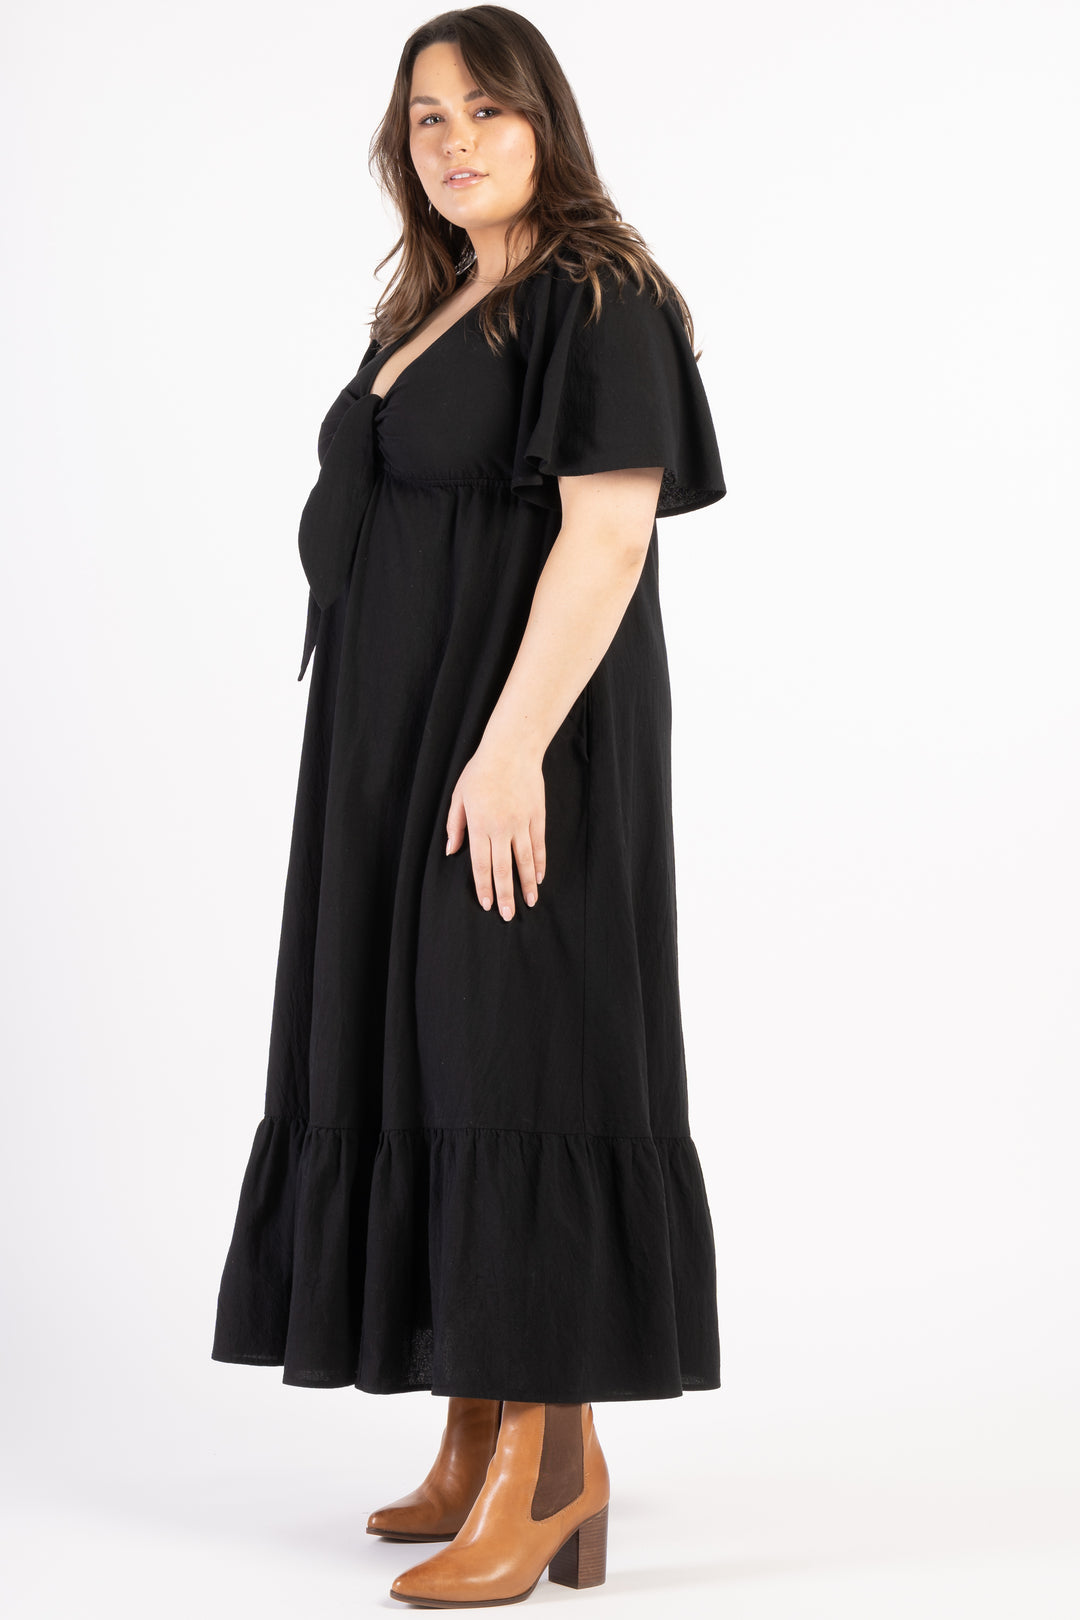 Walking On Sunshine Maxi - Black - Size L Available Only